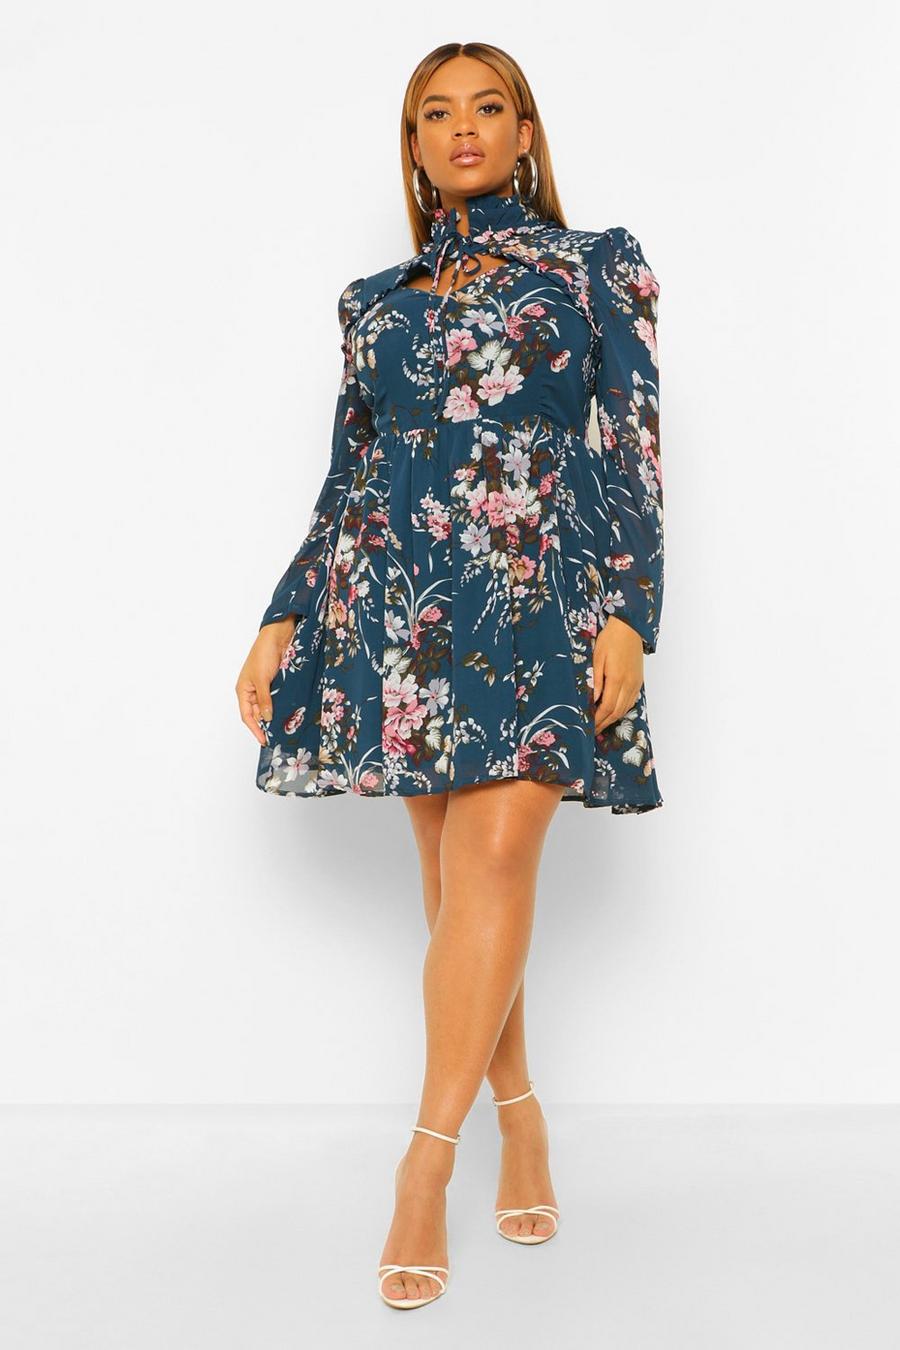 Temerity zelfmoord Octrooi Plus Floral High Neck Cut Out Skater Dress | boohoo